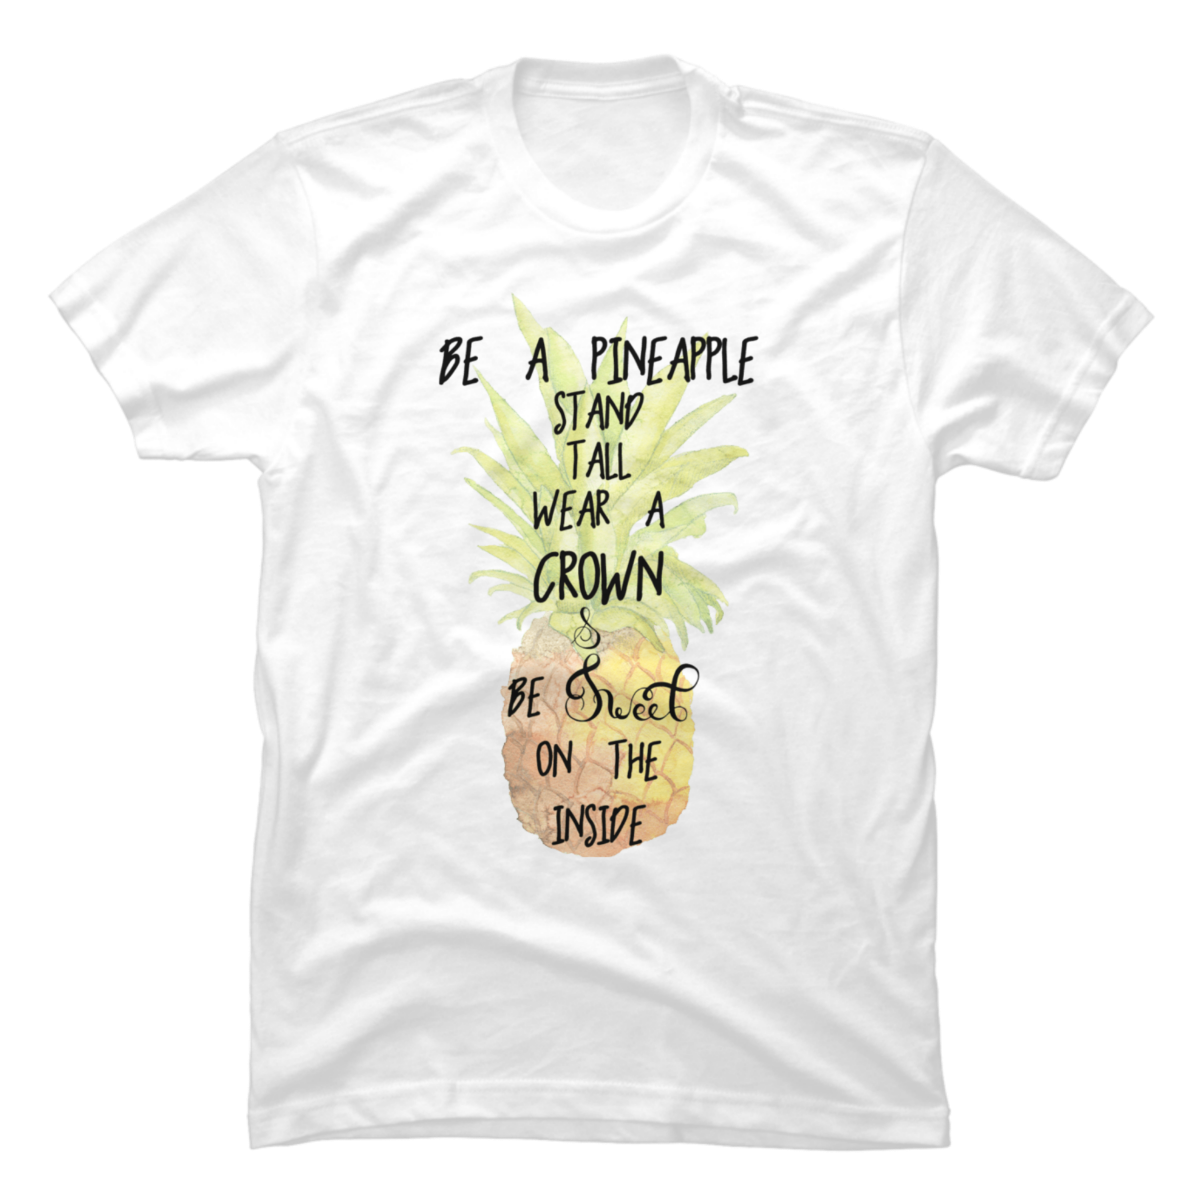 be a pineapple stand tall wear a crown shirt